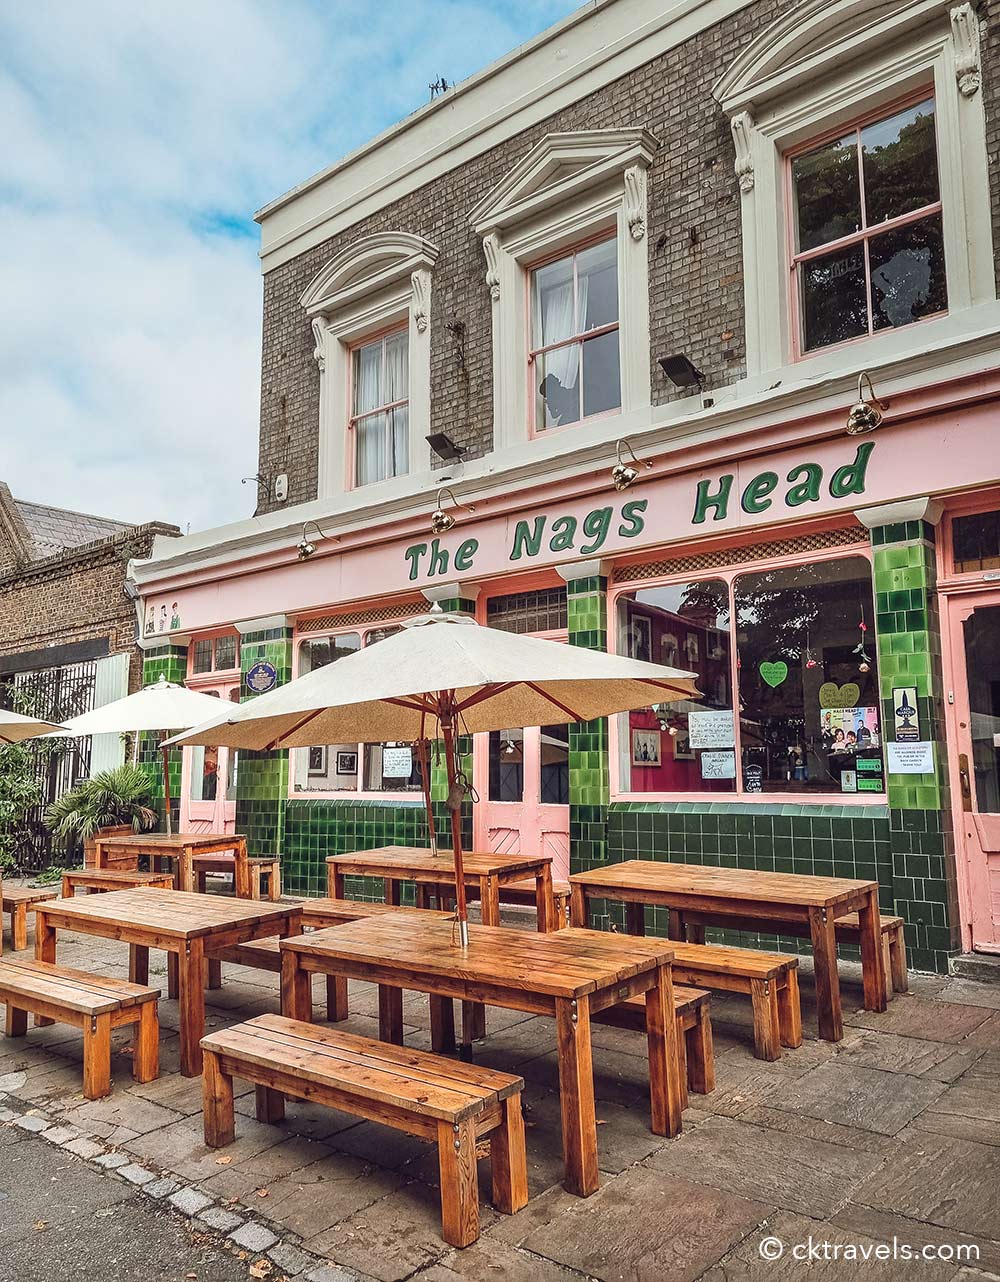 The Nags Head Walthamstow London. Copyright CK Travels